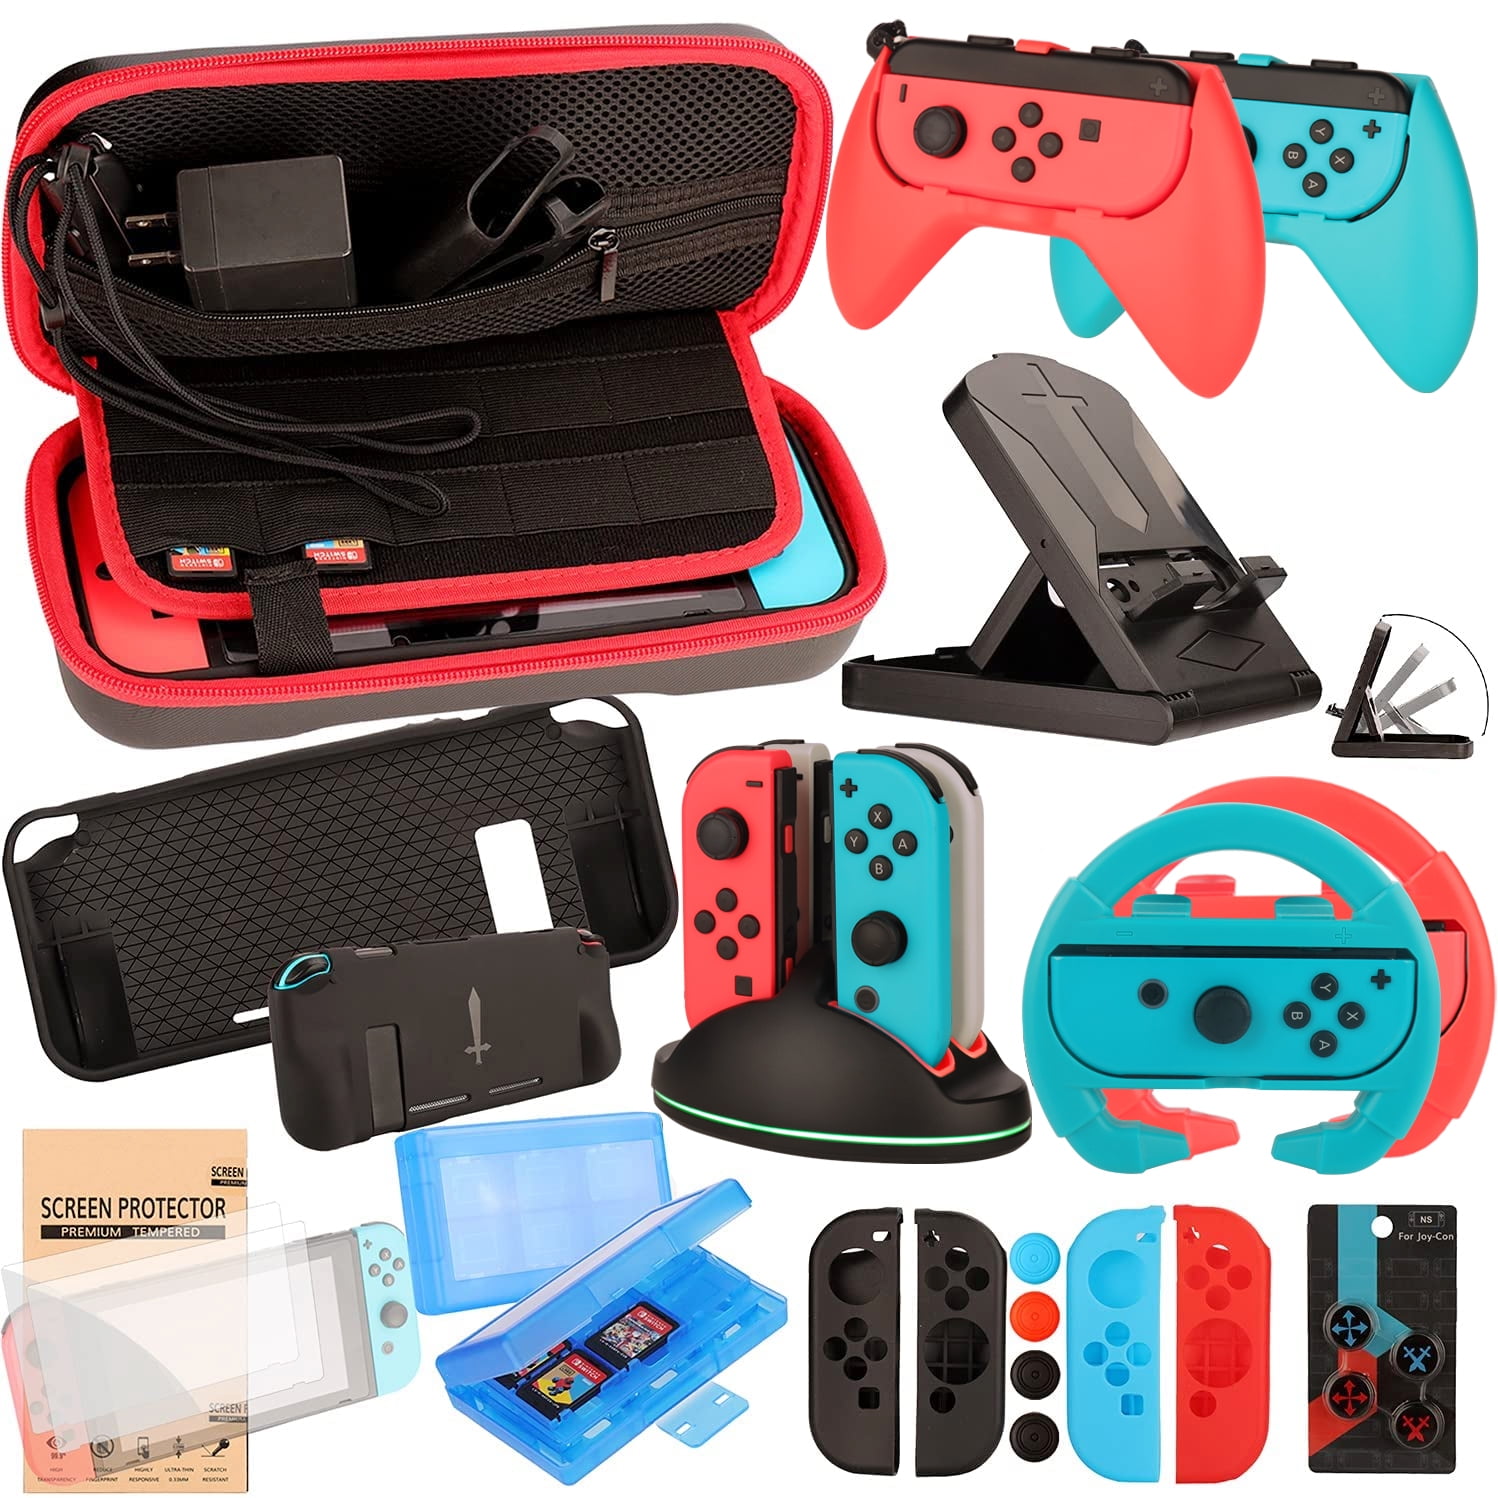  Accessories Bundle for Nintendo Switch OLED Model(2021): Super  Kit with Carrying Case, Screen Protector, Steering Wheels, Joycon Grips,  Charging Dock, Playstand, Protective case and More (23 in 1) : Video Games